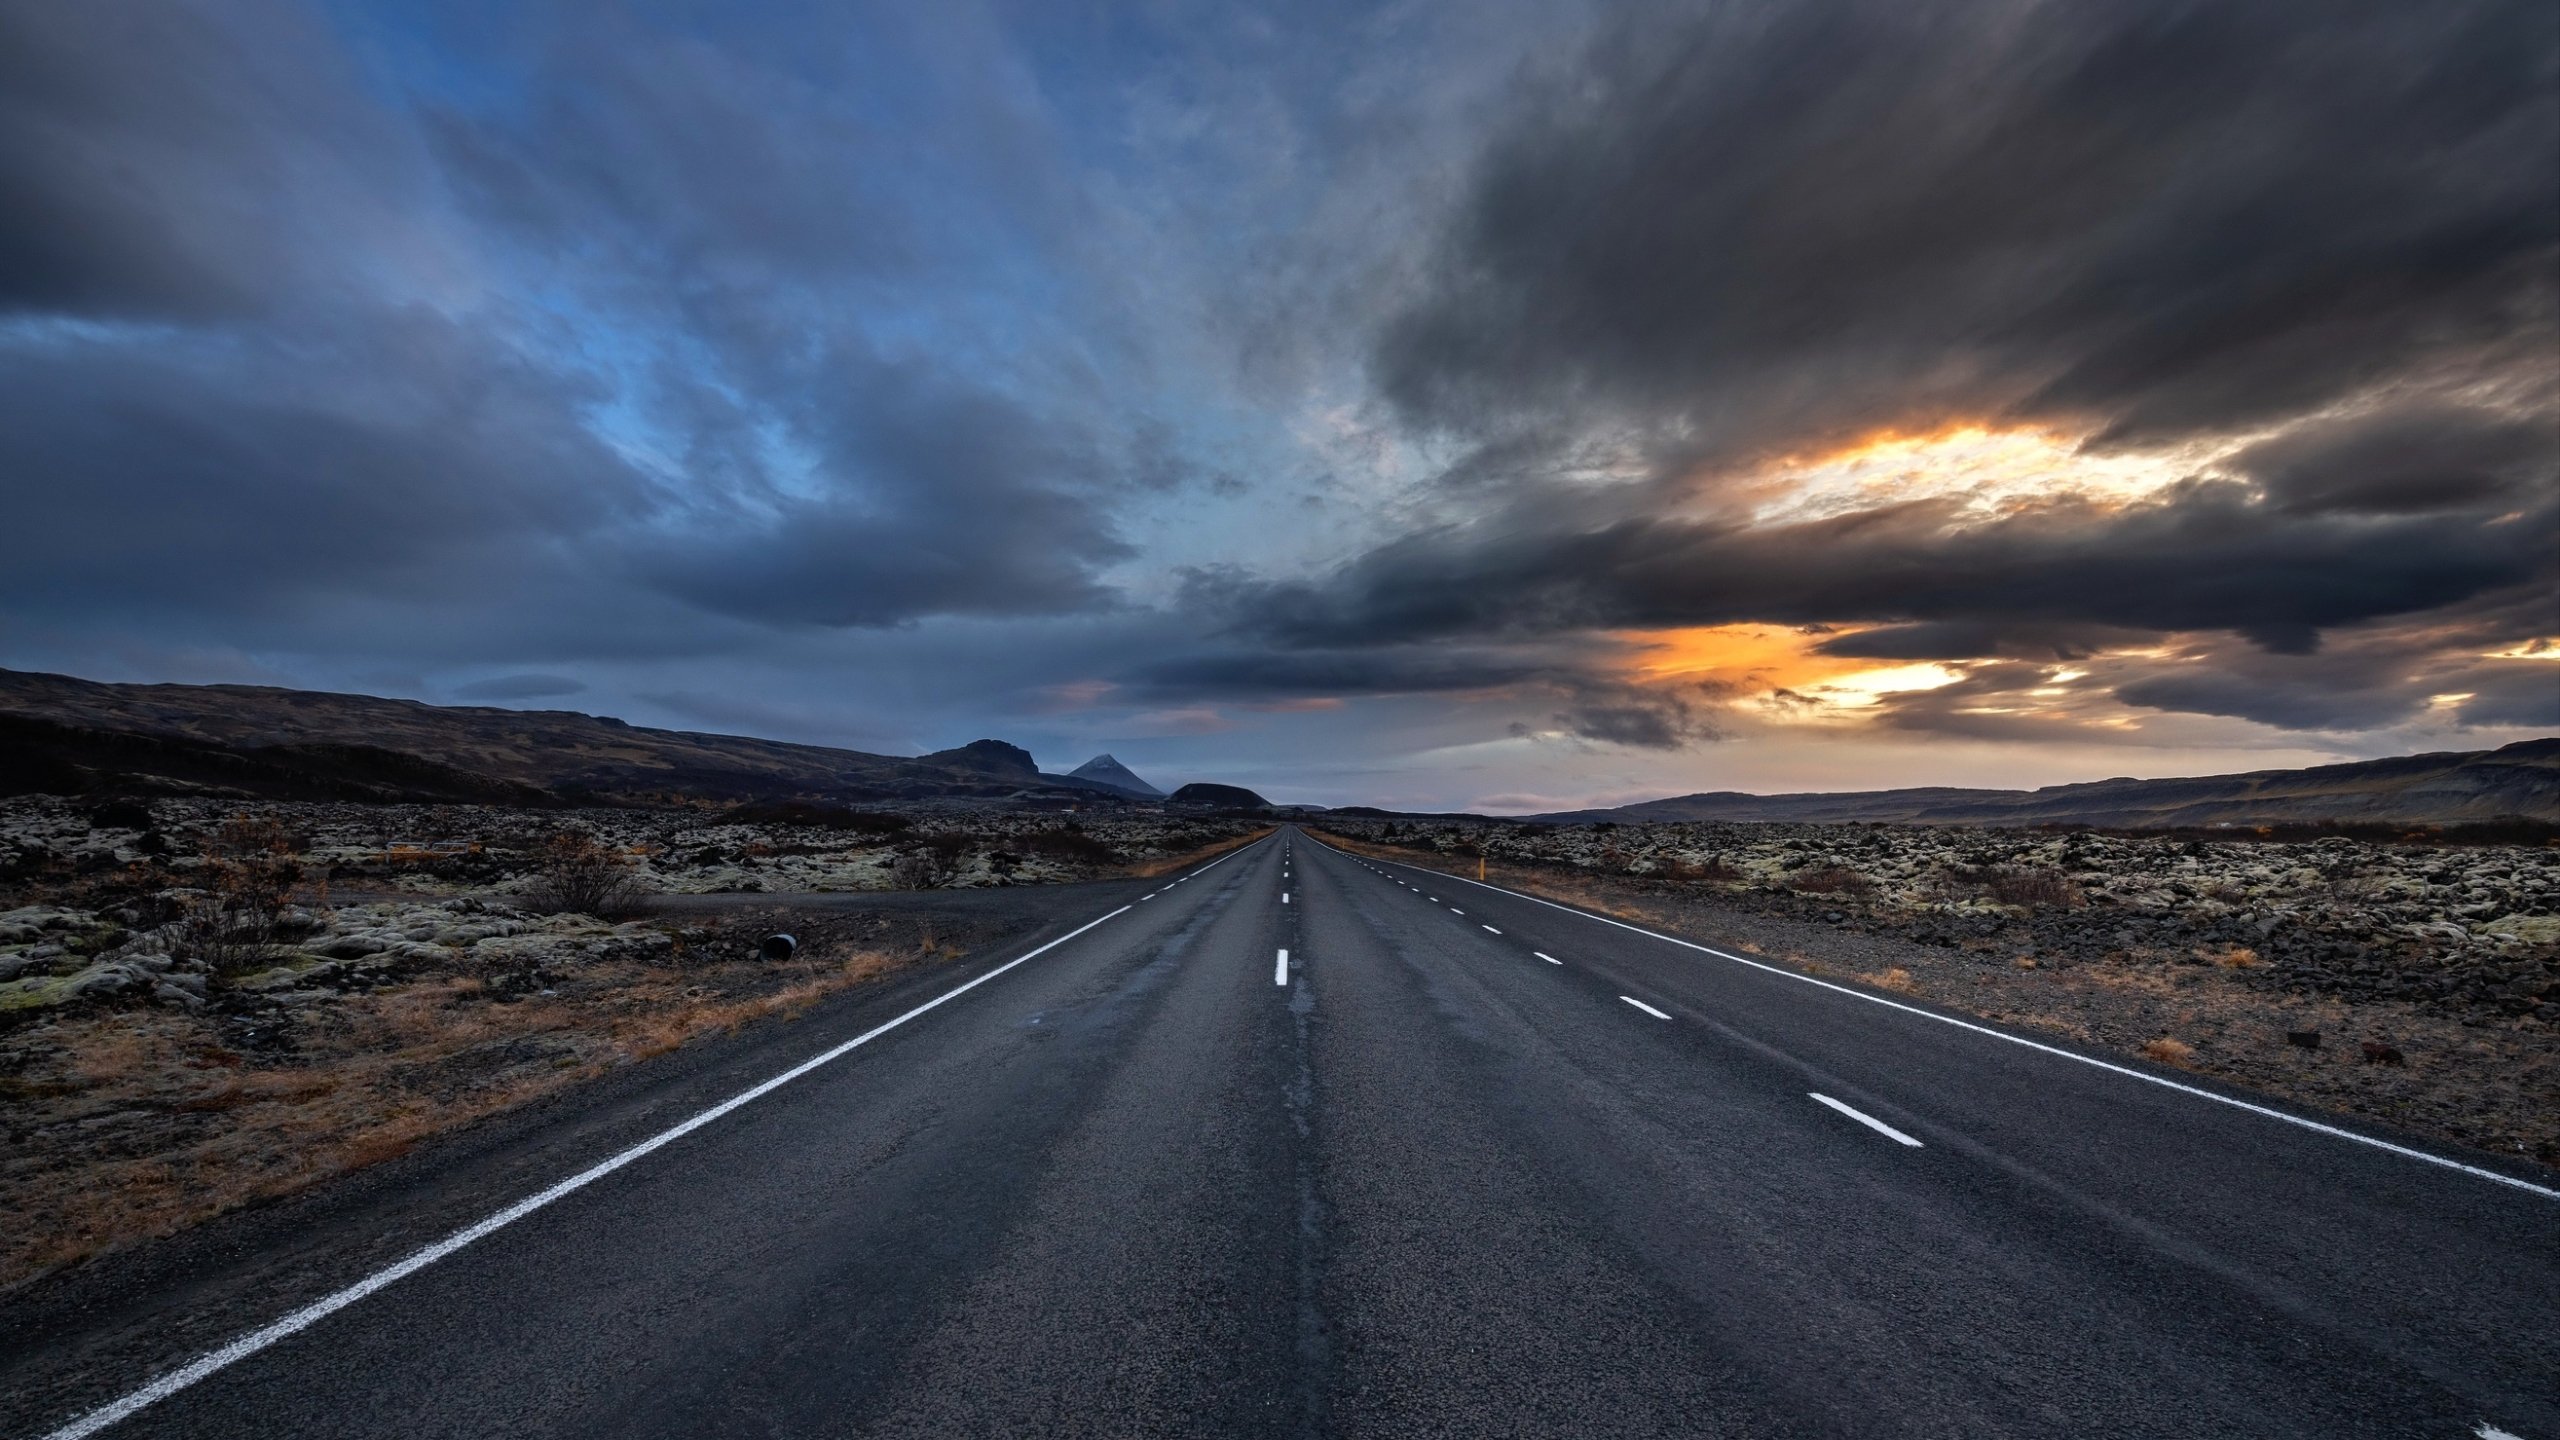 Cloudy Empty Road 1440P Resolution Wallpaper, HD Nature